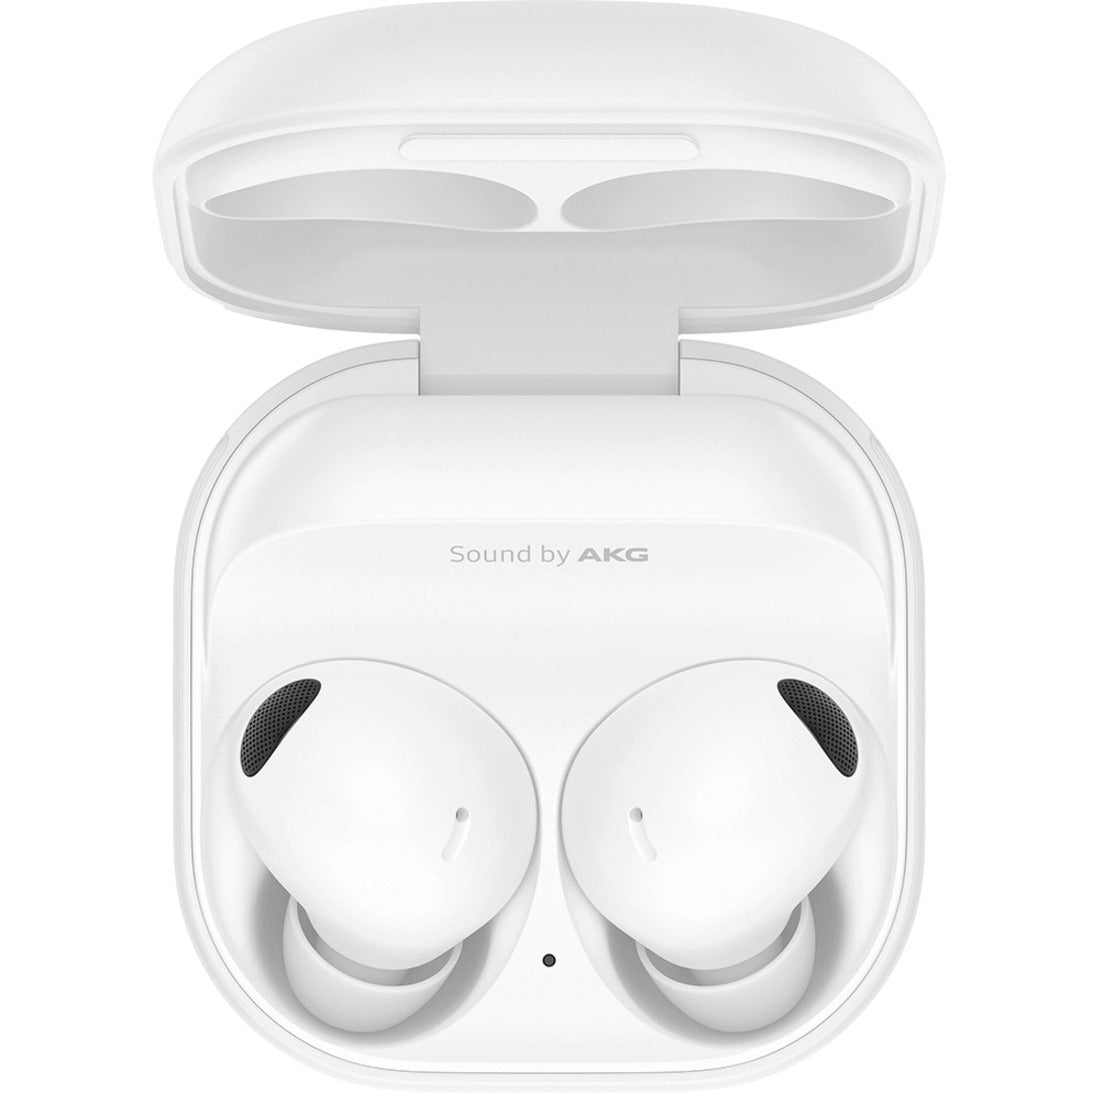 Samsung SM-R510NZWAXAR Galaxy Buds2 Pro, White - True Wireless Earbuds with Active Noise Canceling